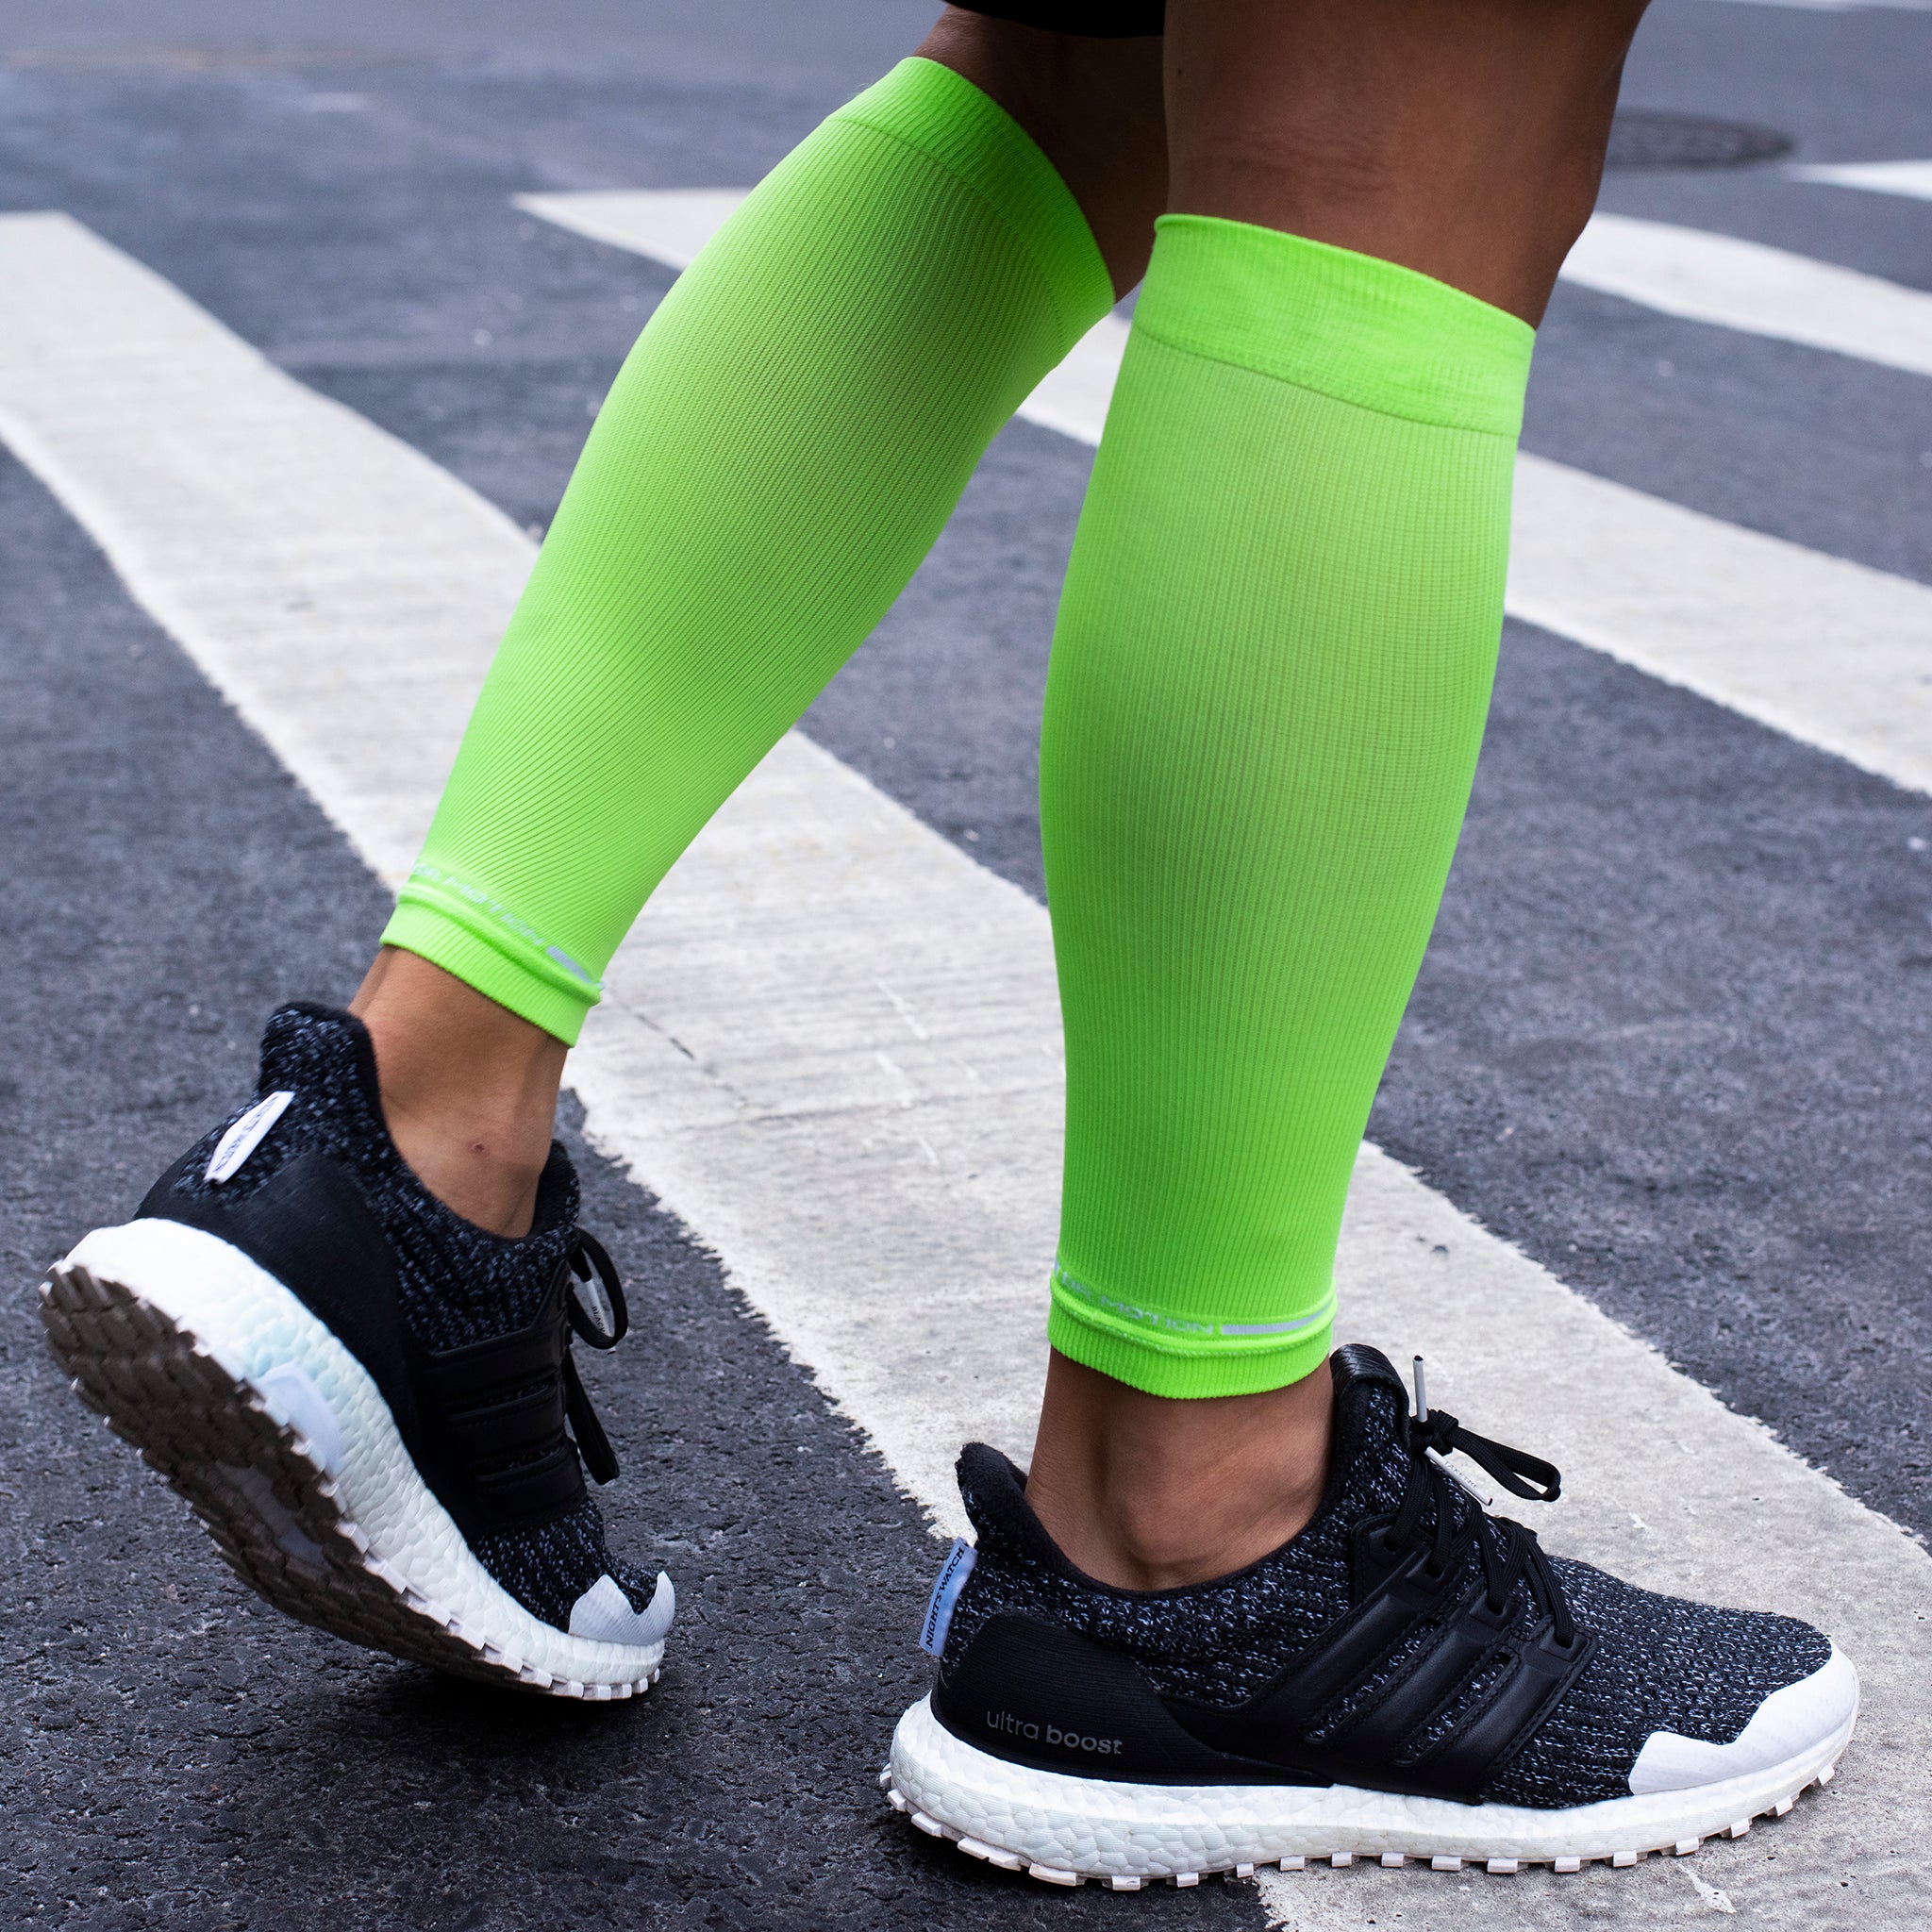 The Benefits of Compression Socks for Retail Workers